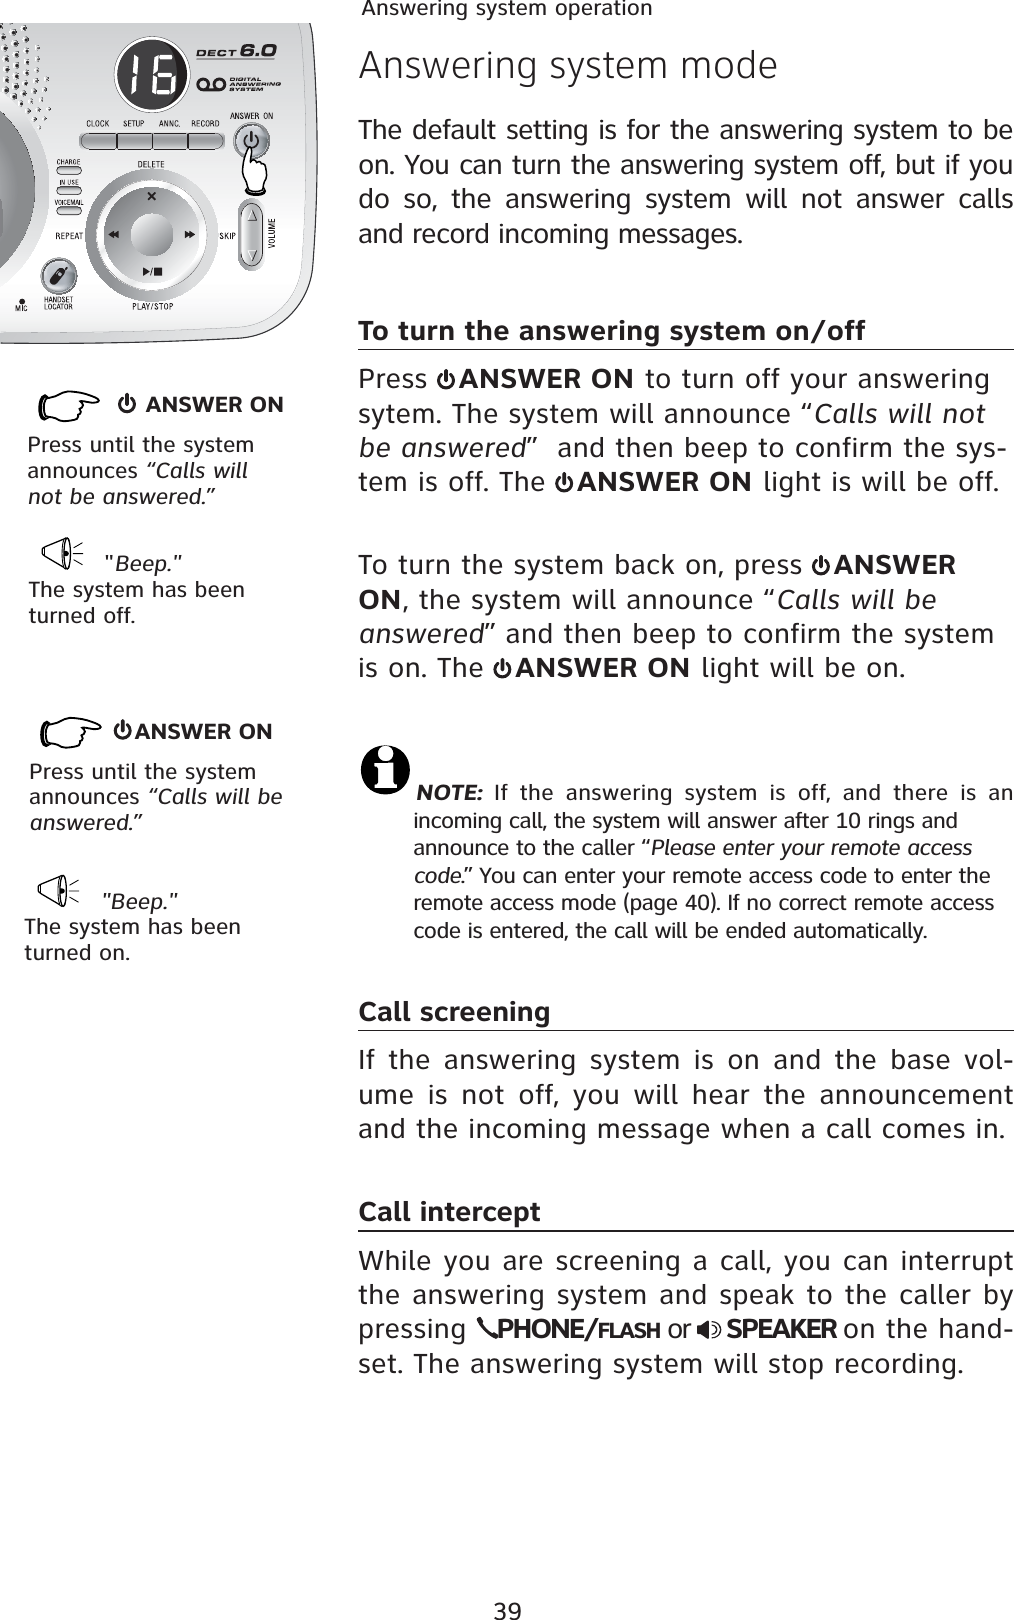 39Answering system operation     ANSWER ONPress until the system announces “Calls will not be answered.”   &quot;Beep.&quot;The system has been turned off. Answering system modeThe default setting is for the answering system to be on. You can turn the answering system off, but if you do so, the answering system will not answer calls and record incoming messages.To turn the answering system on/off Press  ANSWER ON to turn off your answering sytem. The system will announce “Calls will not be answered”  and then beep to confirm the sys-tem is off. The  ANSWER ON light is will be off.To turn the system back on, press  ANSWER ON, the system will announce “Calls will be answered” and then beep to confirm the system is on. The  ANSWER ON light will be on.NOTE: If the answering system is off, and there is an    incoming call, the system will answer after 10 rings and       announce to the caller “Please enter your remote access    code.” You can enter your remote access code to enter the    remote access mode (page 40). If no correct remote access    code is entered, the call will be ended automatically.Call screeningIf the answering system is on and the base vol-ume is not off, you will hear the announcement and the incoming message when a call comes in.  Call interceptWhile you are screening a call, you can interrupt the answering system and speak to the caller by pressing  PHONE/FLASH or  SPEAKER on the hand-set. The answering system will stop recording. &quot;Beep.&quot;The system has been turned on.ANSWER ONPress until the system announces “Calls will be answered.”